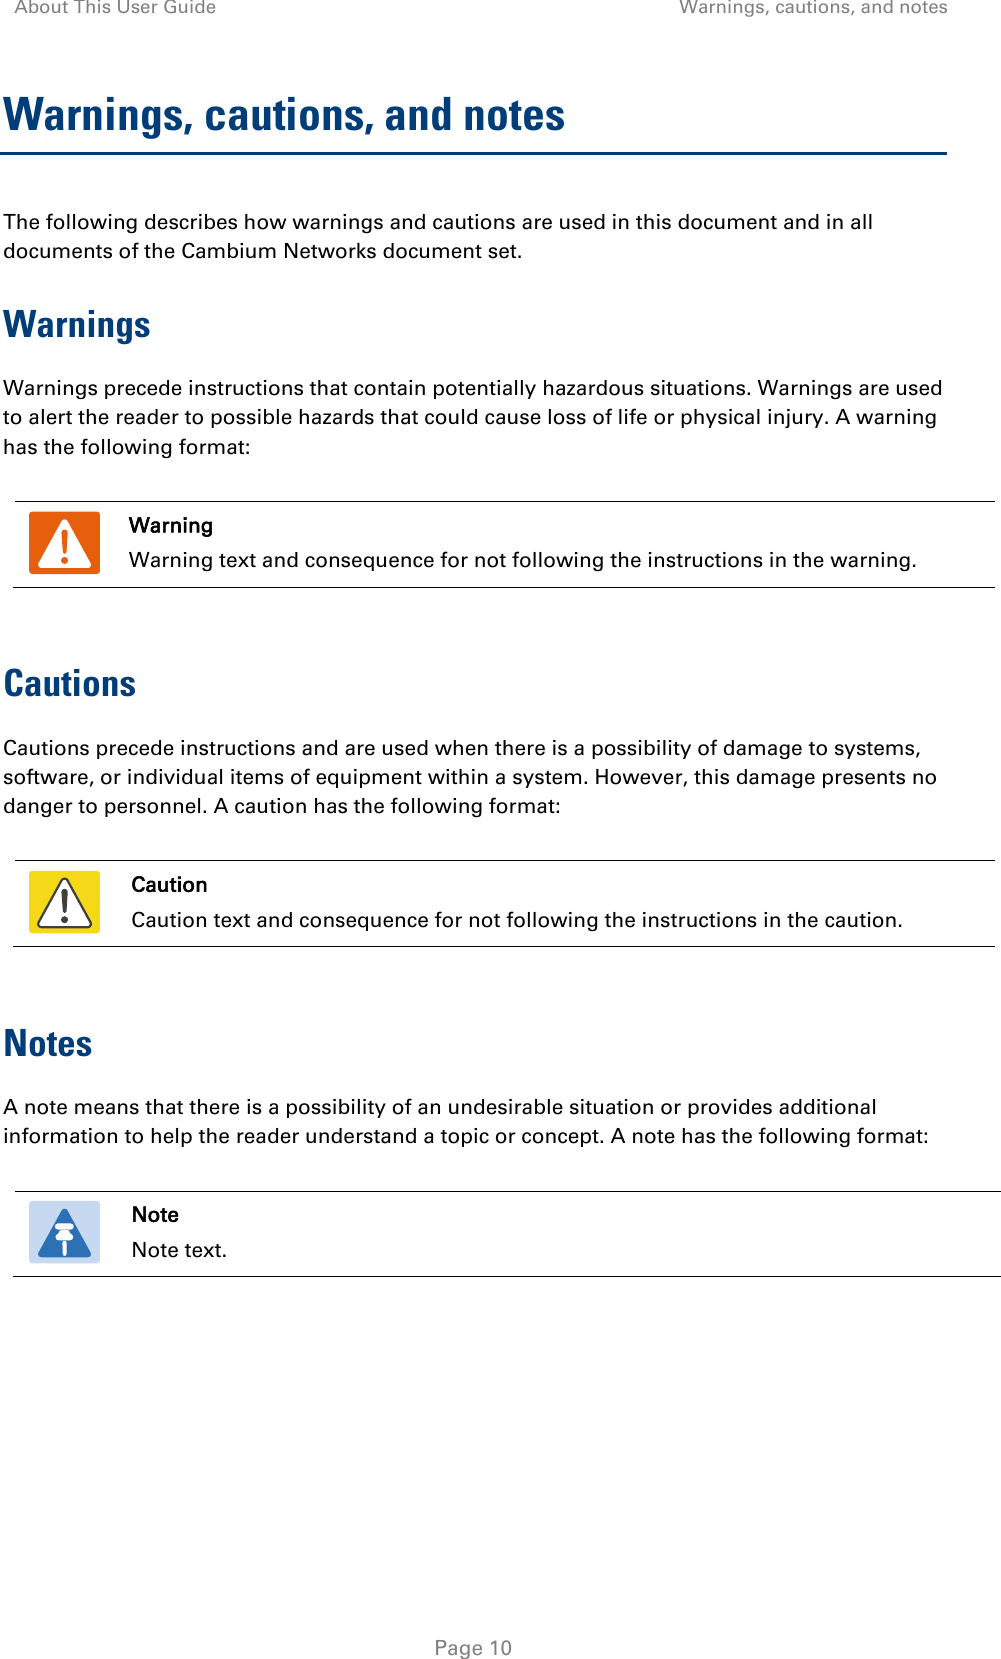 About This User Guide Warnings, cautions, and notes   Page 10 Warnings, cautions, and notes The following describes how warnings and cautions are used in this document and in all documents of the Cambium Networks document set. Warnings Warnings precede instructions that contain potentially hazardous situations. Warnings are used to alert the reader to possible hazards that could cause loss of life or physical injury. A warning has the following format:   Warning Warning text and consequence for not following the instructions in the warning.  Cautions Cautions precede instructions and are used when there is a possibility of damage to systems, software, or individual items of equipment within a system. However, this damage presents no danger to personnel. A caution has the following format:   Caution Caution text and consequence for not following the instructions in the caution.  Notes A note means that there is a possibility of an undesirable situation or provides additional information to help the reader understand a topic or concept. A note has the following format:   Note Note text.  